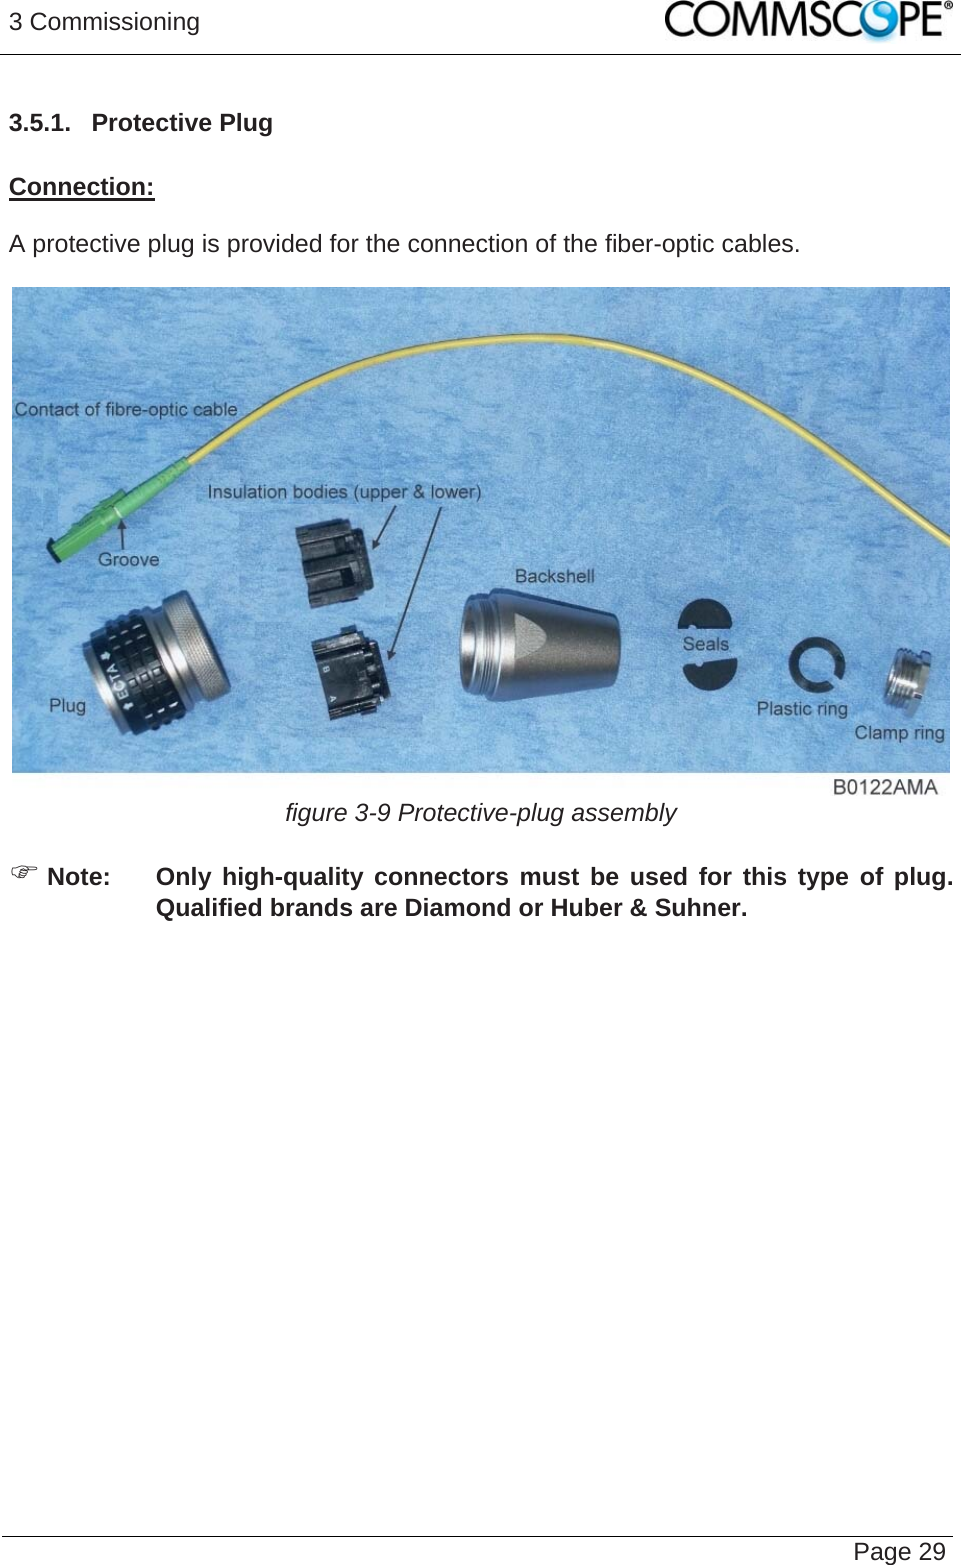 3 Commissioning   Page 293.5.1.  Protective Plug  Connection:  A protective plug is provided for the connection of the fiber-optic cables.   figure 3-9 Protective-plug assembly  ) Note:  Only high-quality connectors must be used for this type of plug. Qualified brands are Diamond or Huber &amp; Suhner.   